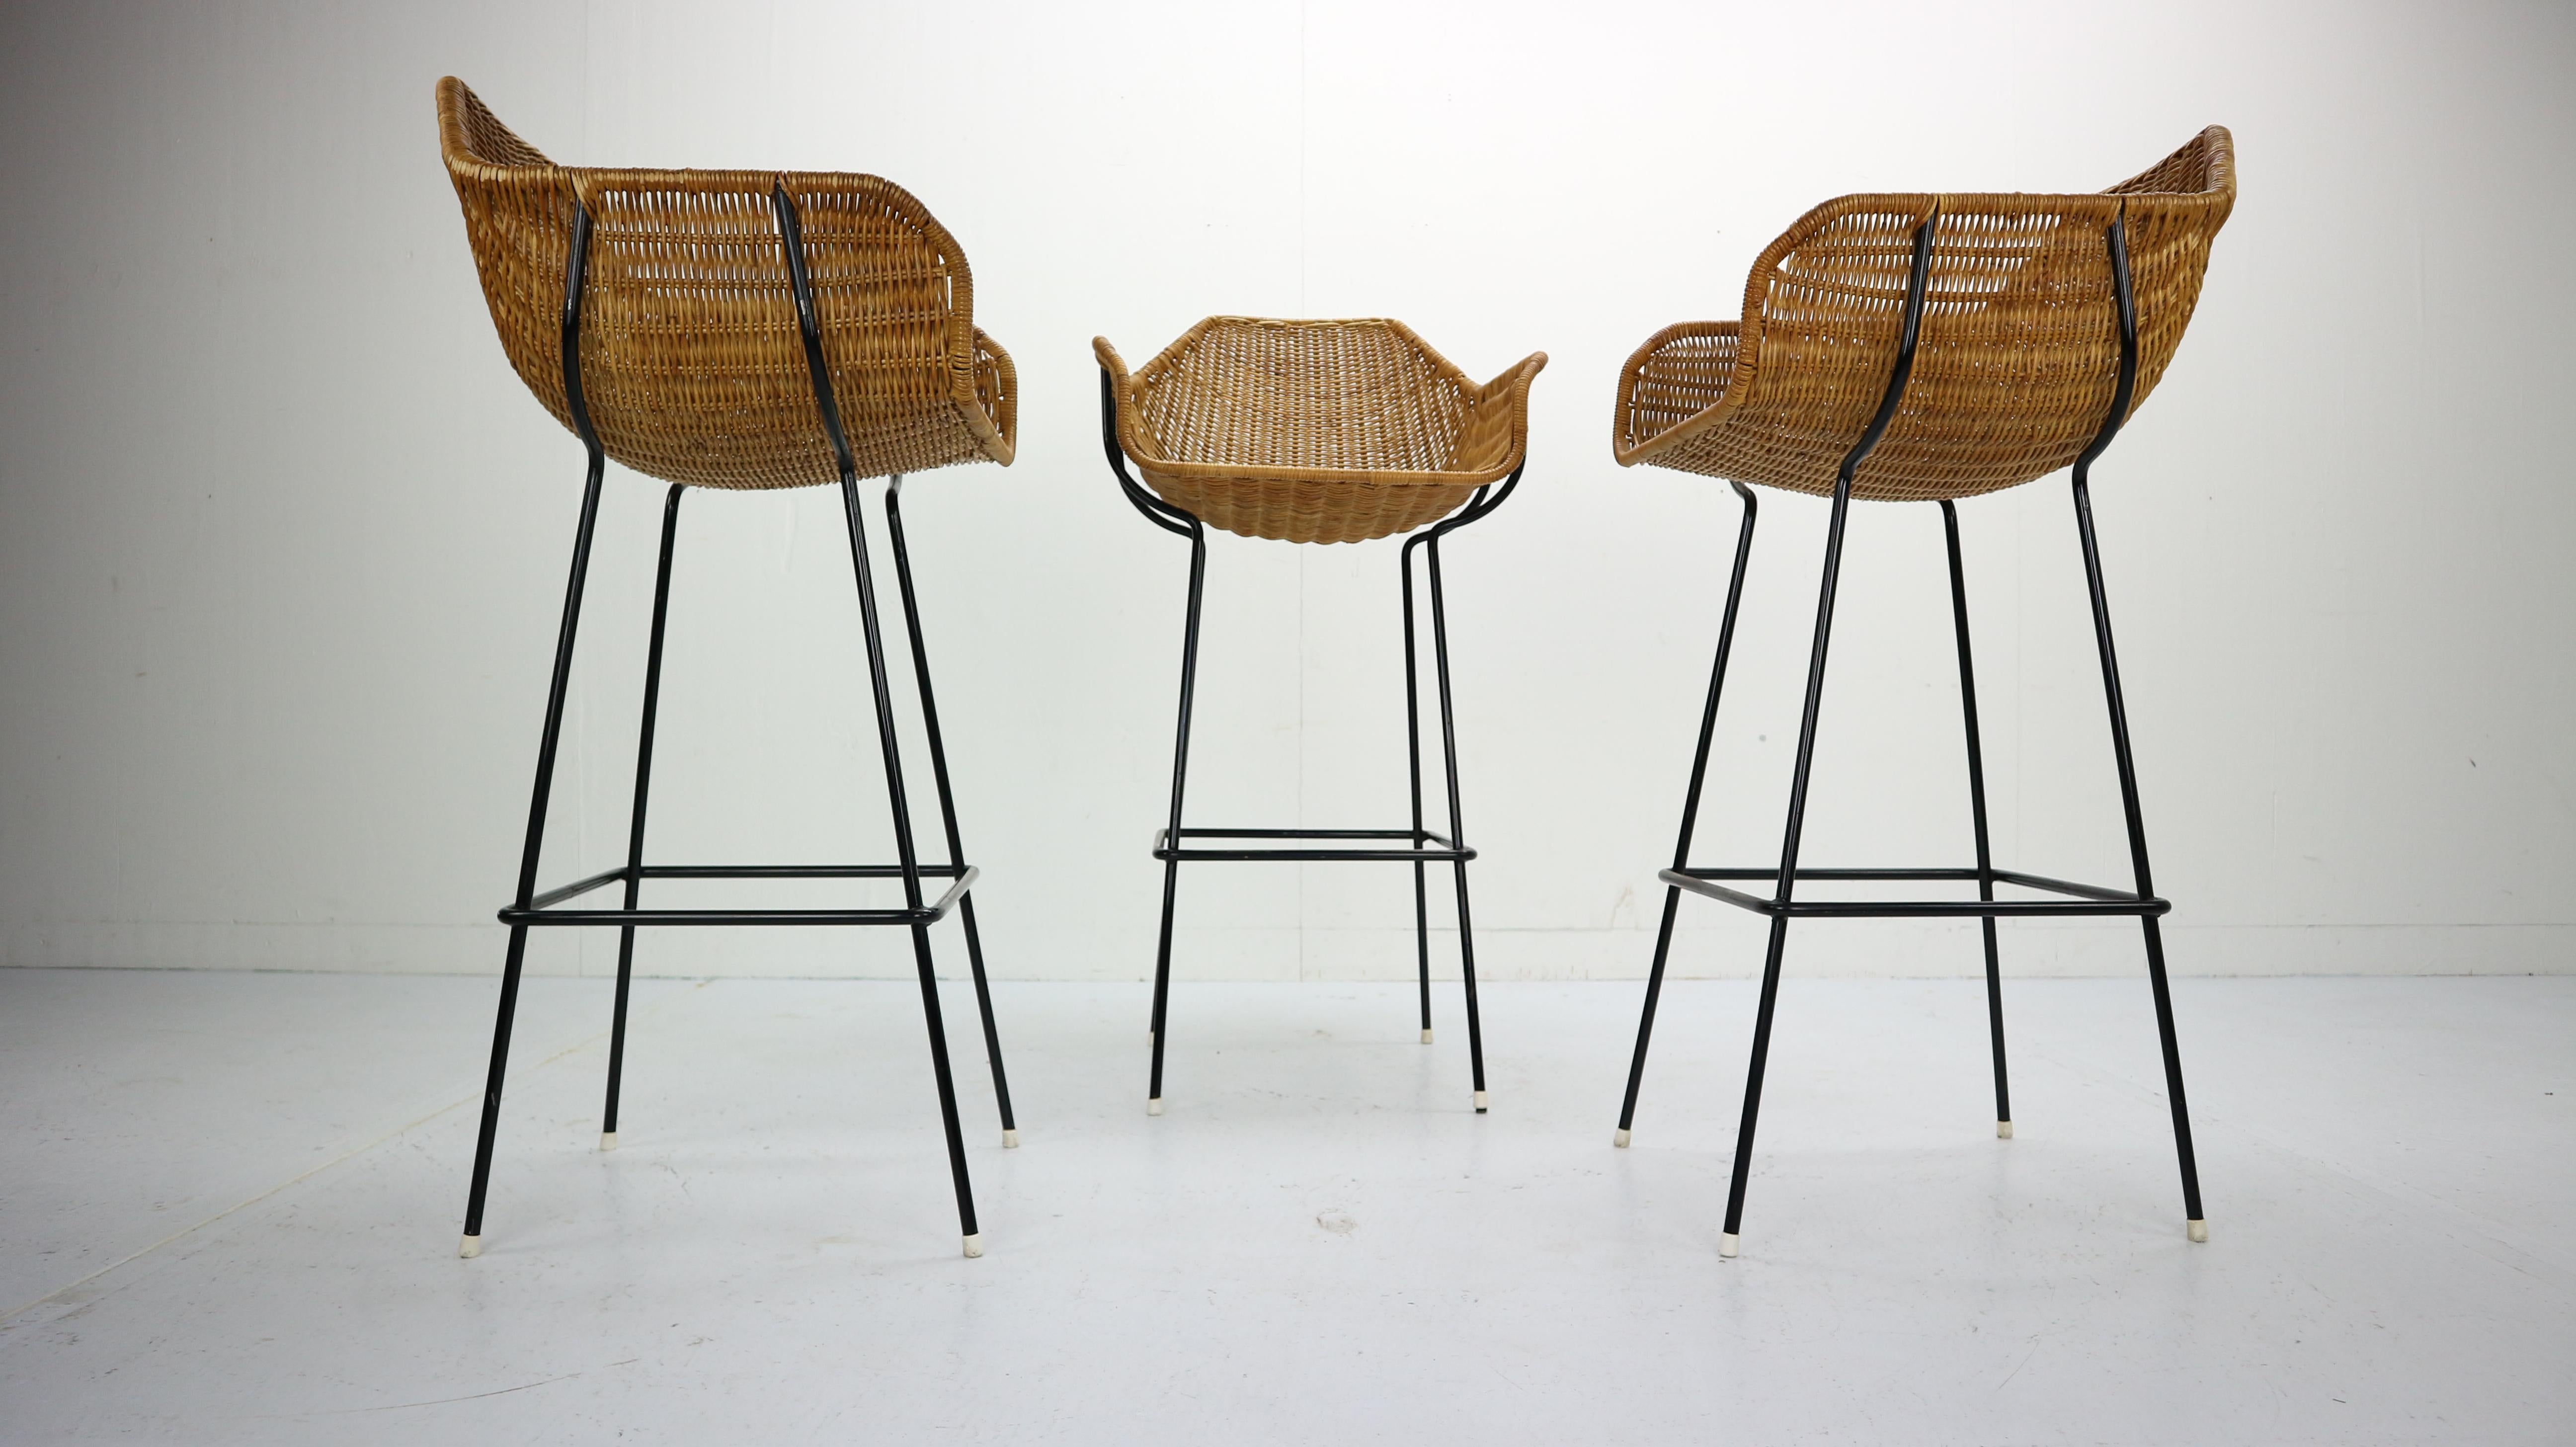 Set of 3 rare bar stools design by Dirk Van Sliedregt and manufactured in the Netherlands circa 1960s by Rohe Noordwolde.

Gorgeous original set within elegantly woven rattan bucket seats and black metal frames. Original condition.